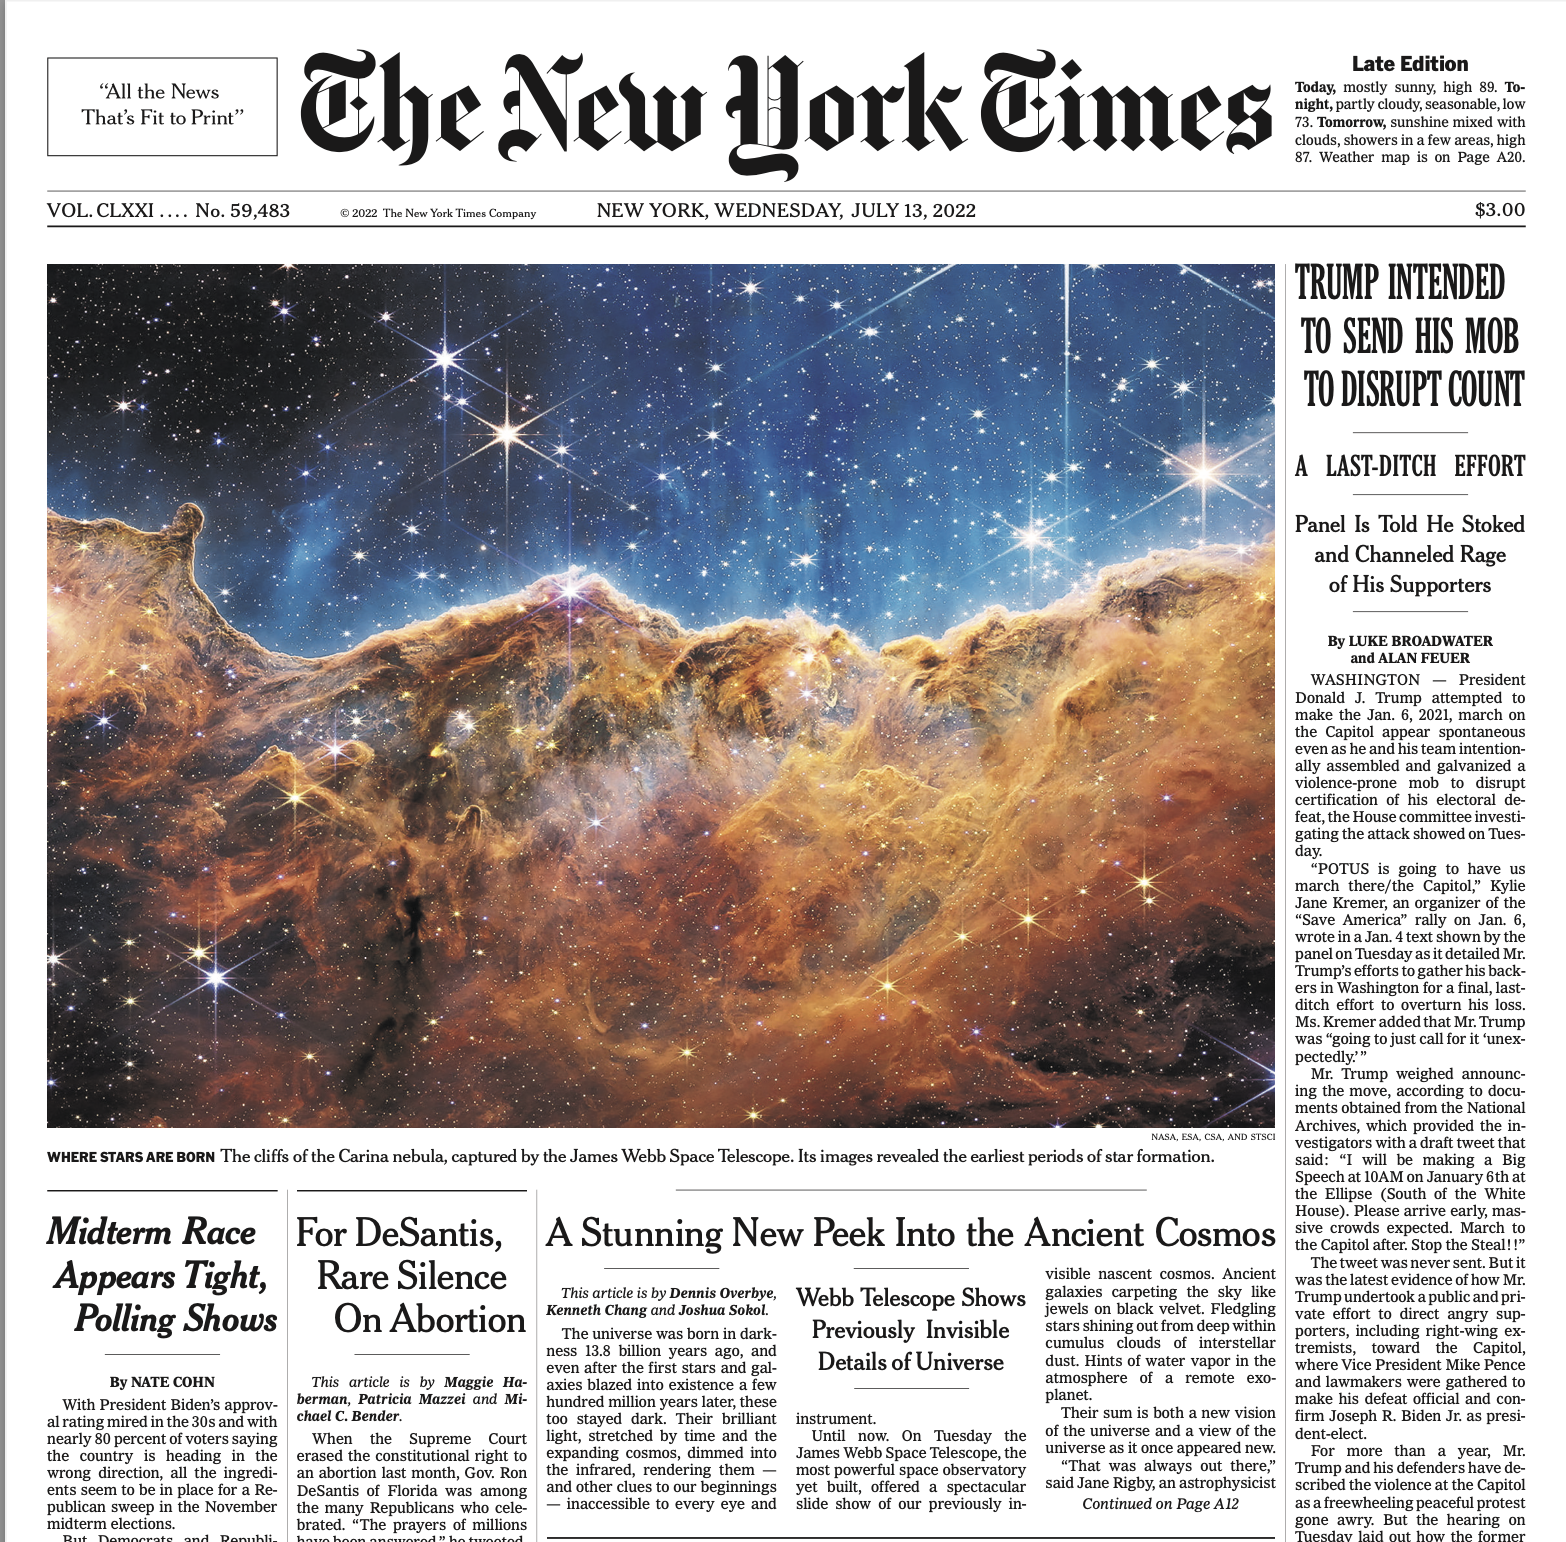 Front page of the New York Times newspaper depicting the Carina Nebula